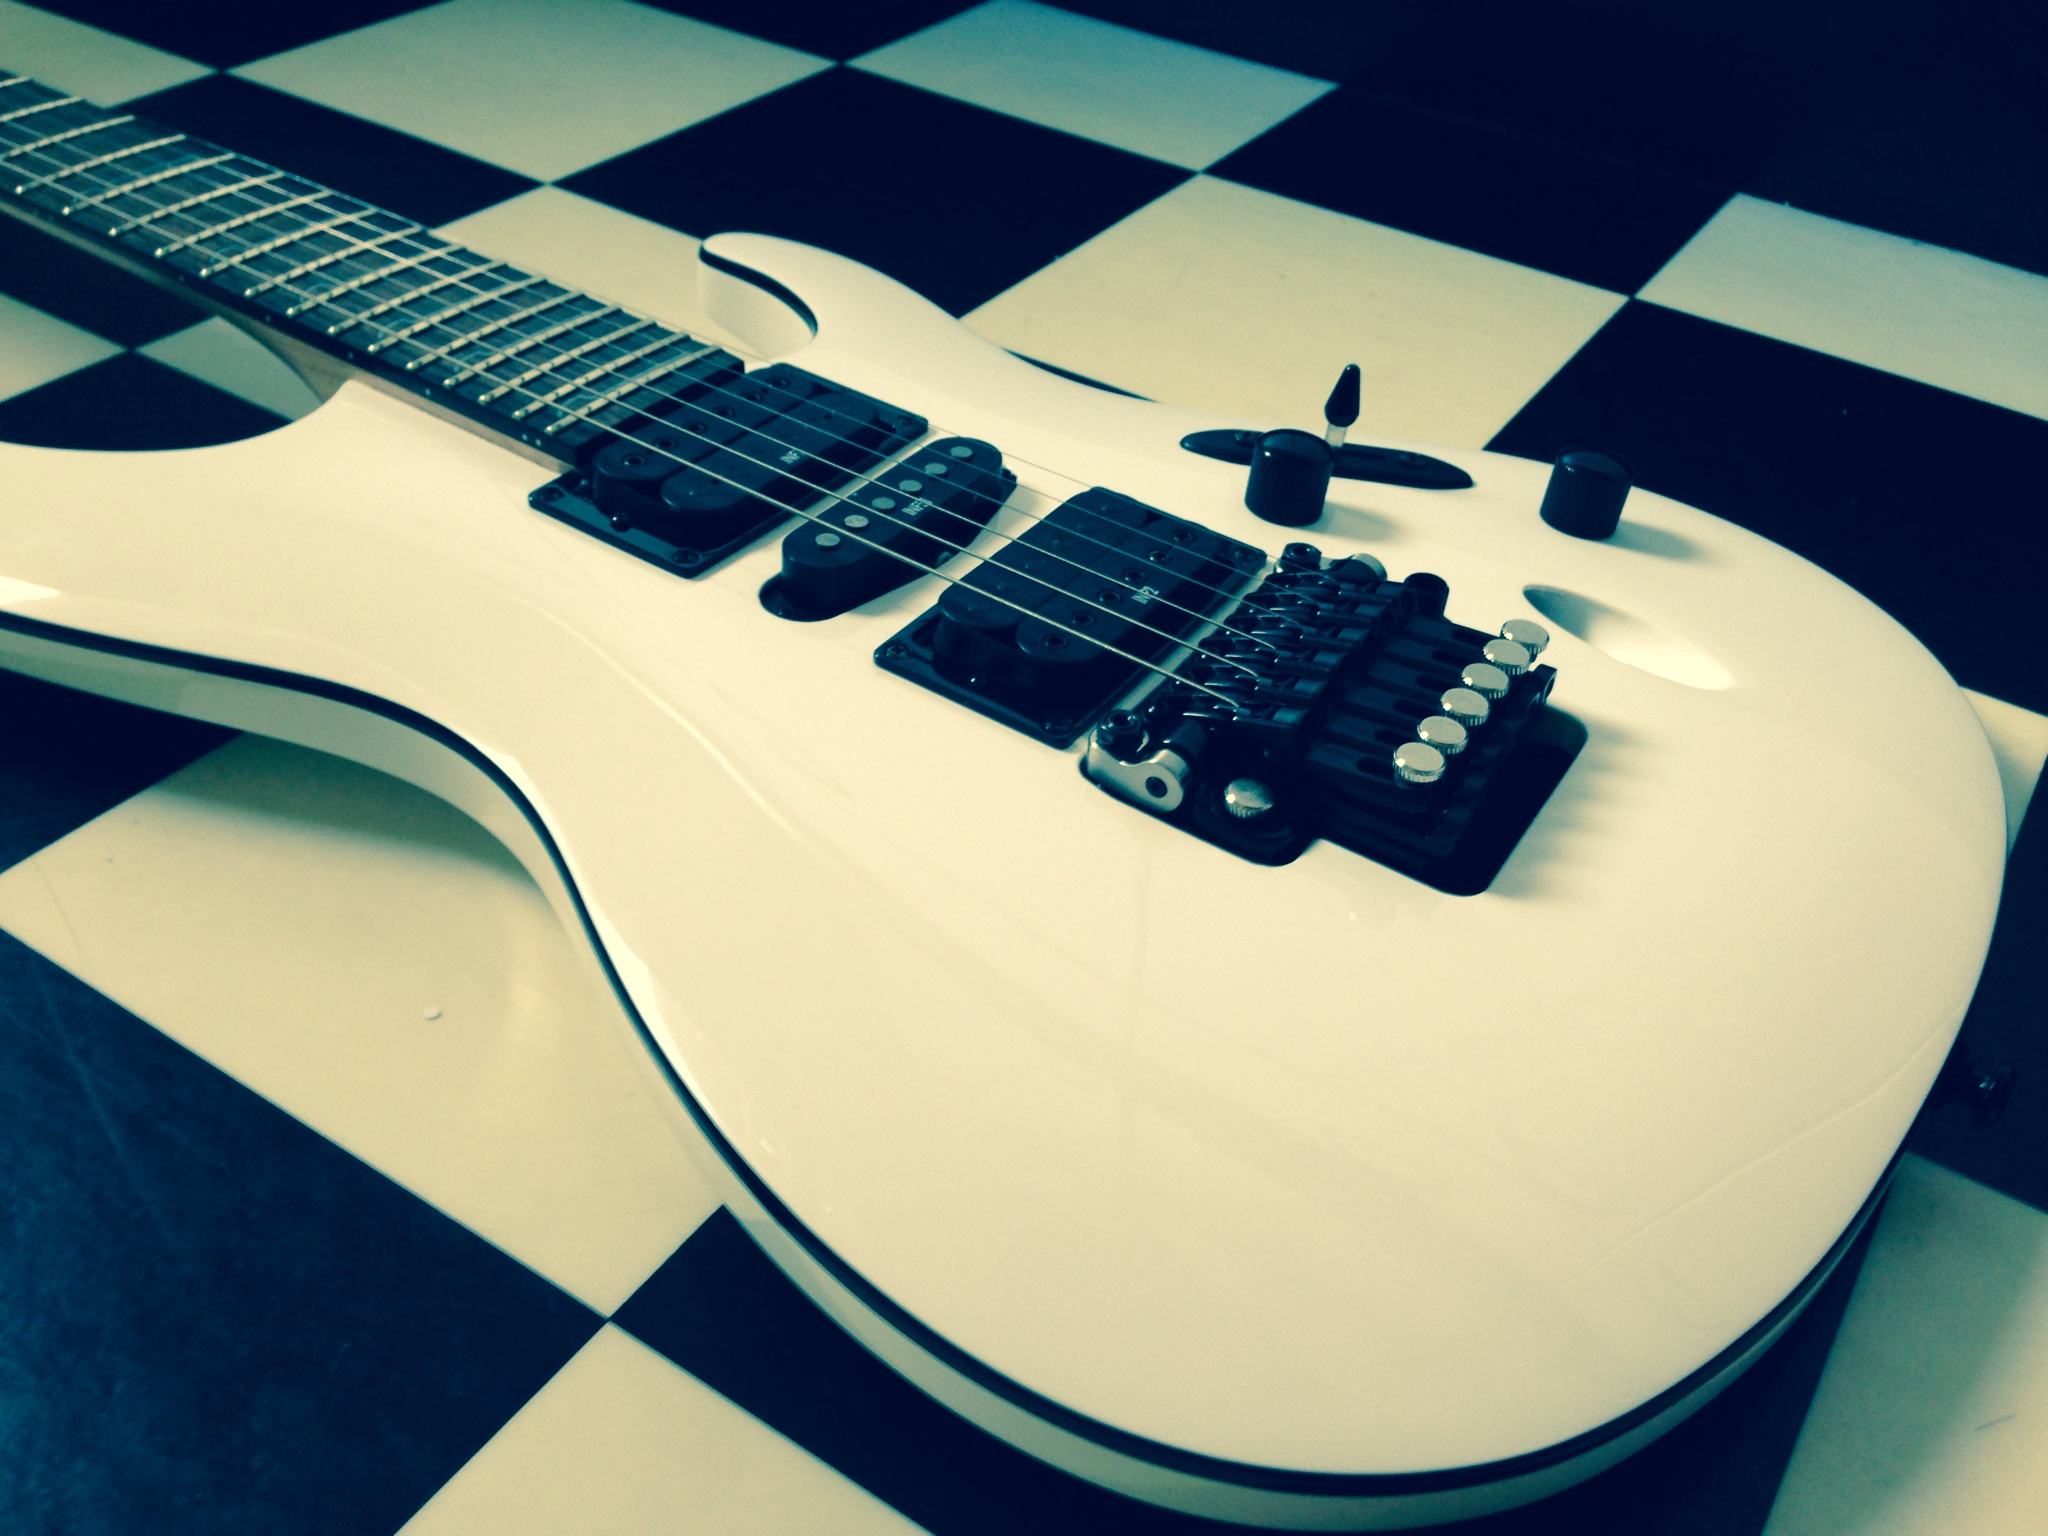 Ibanez-S-series-electric-guitar-white-model-S570B-The-Wong-Janice-3.JPG